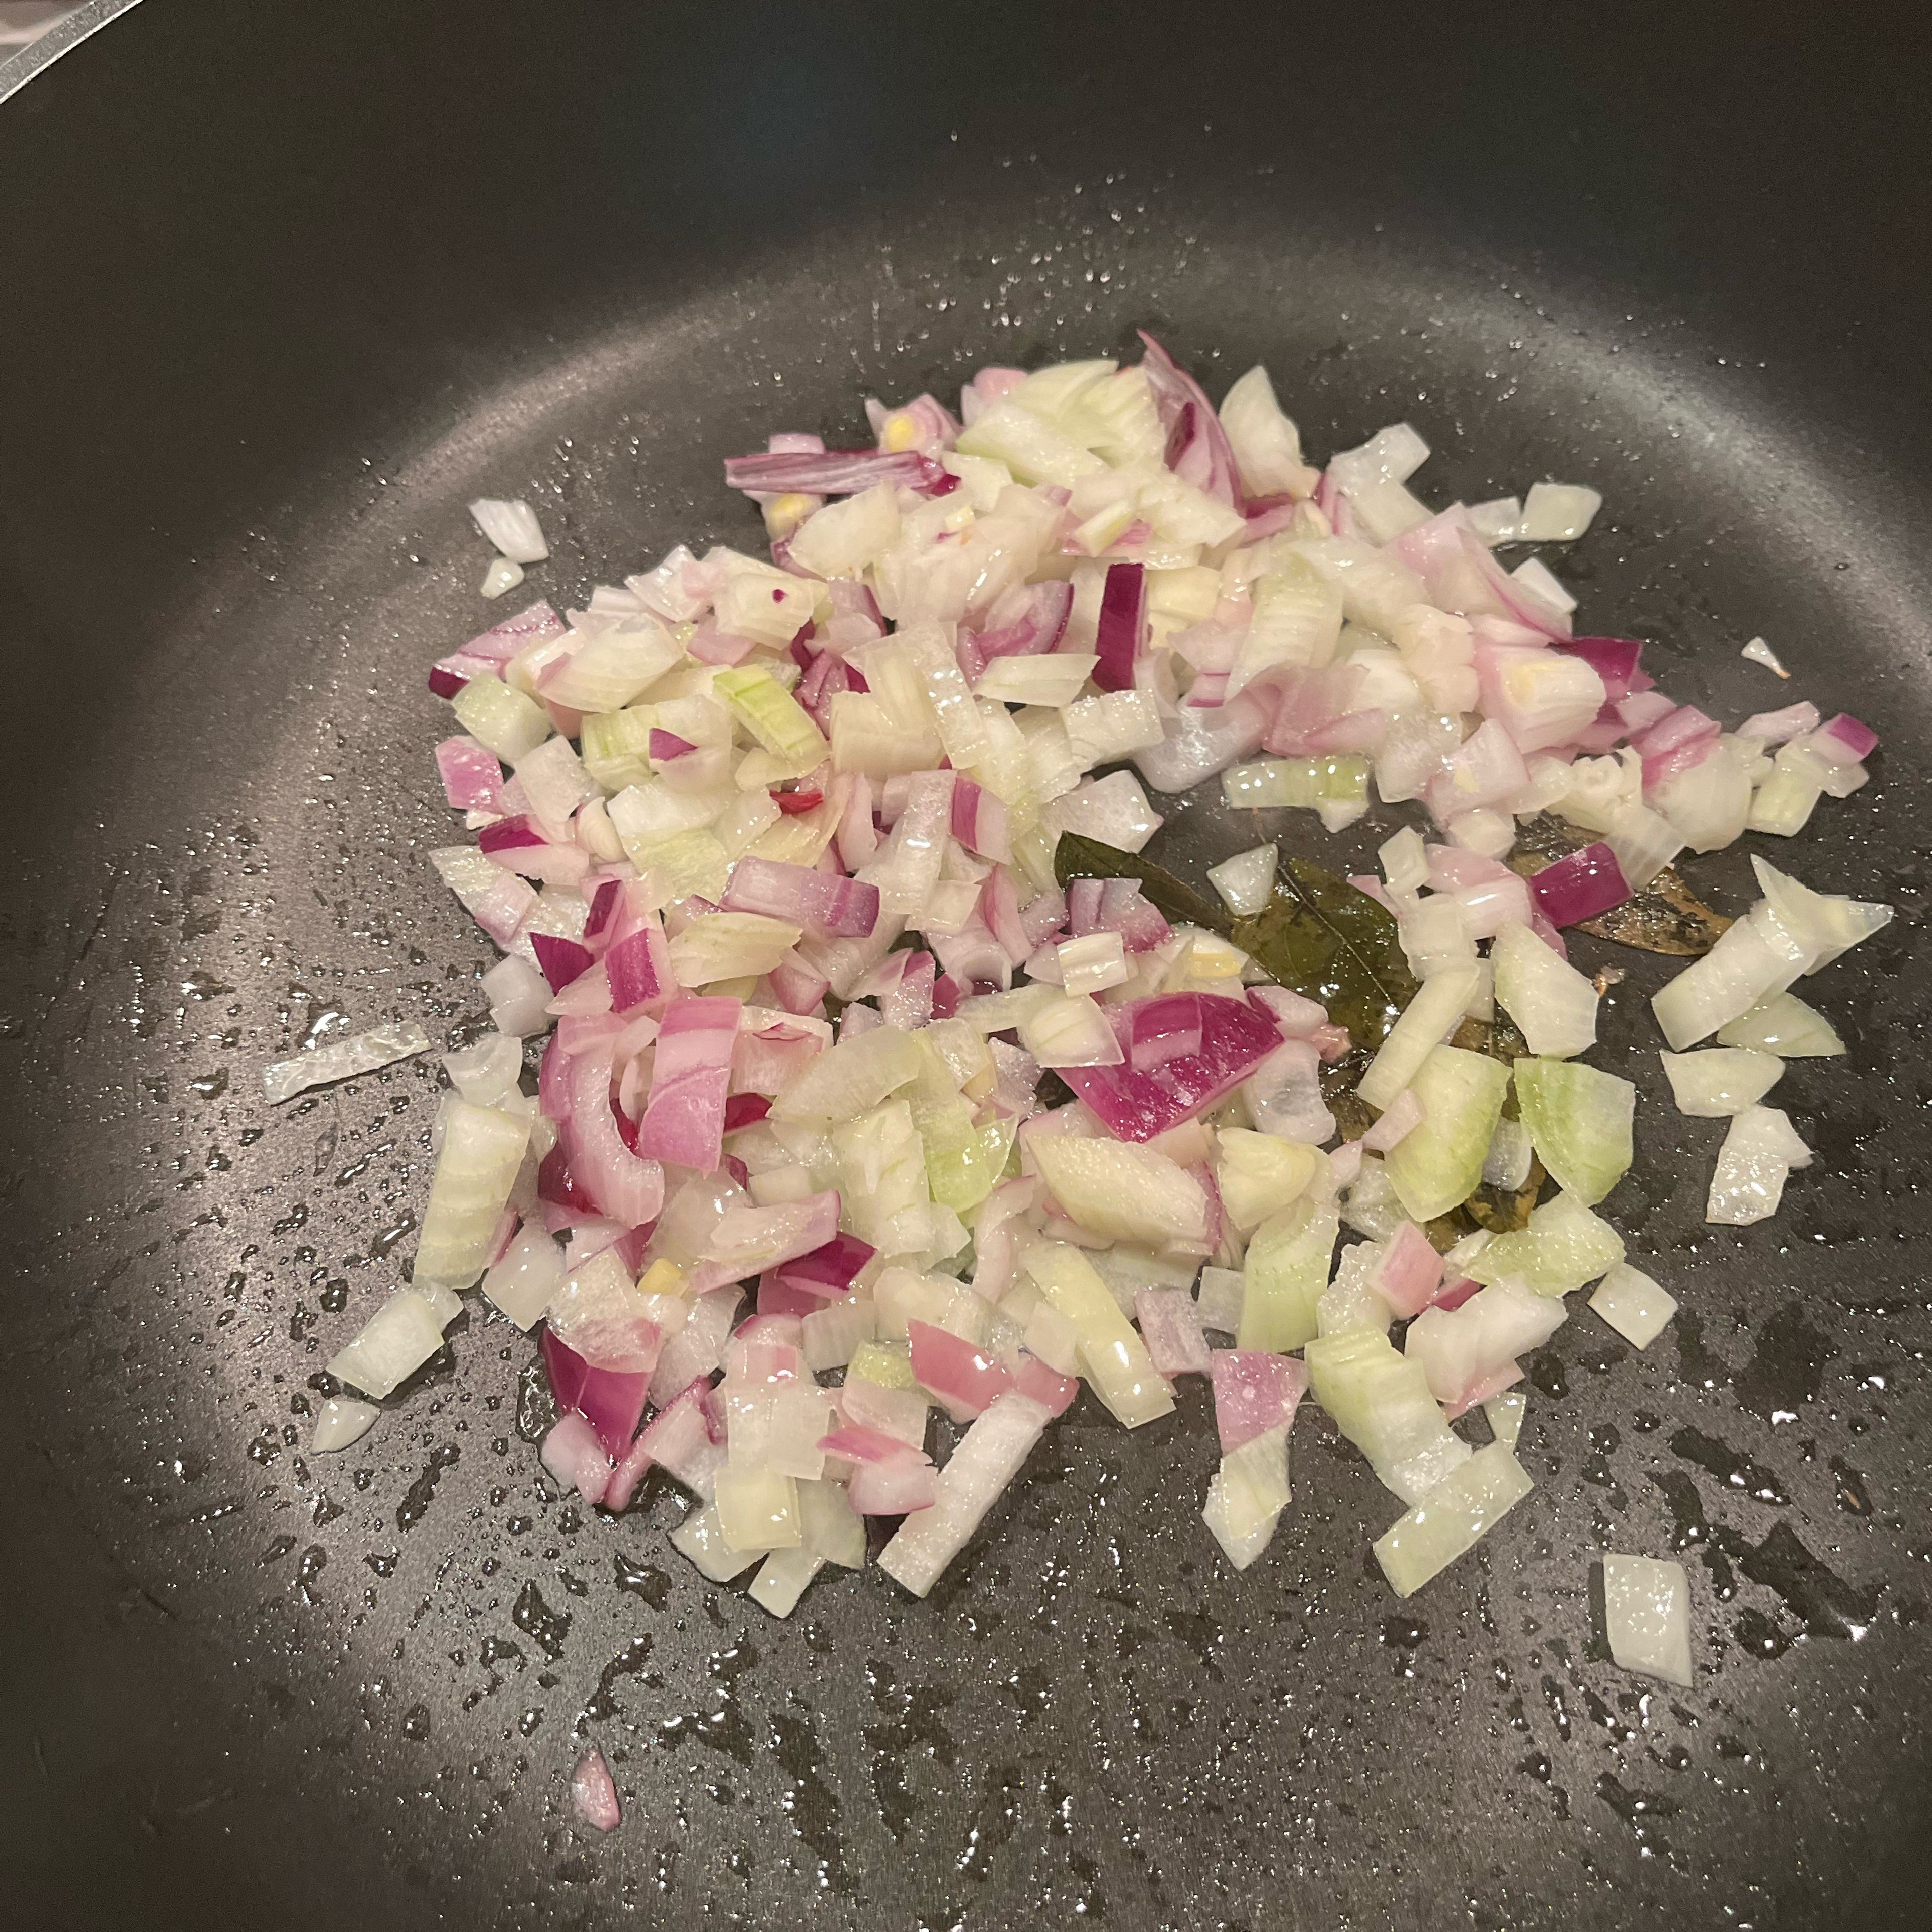 Heat oil in a pan, add curry leaves and onions and fry till golden brown.